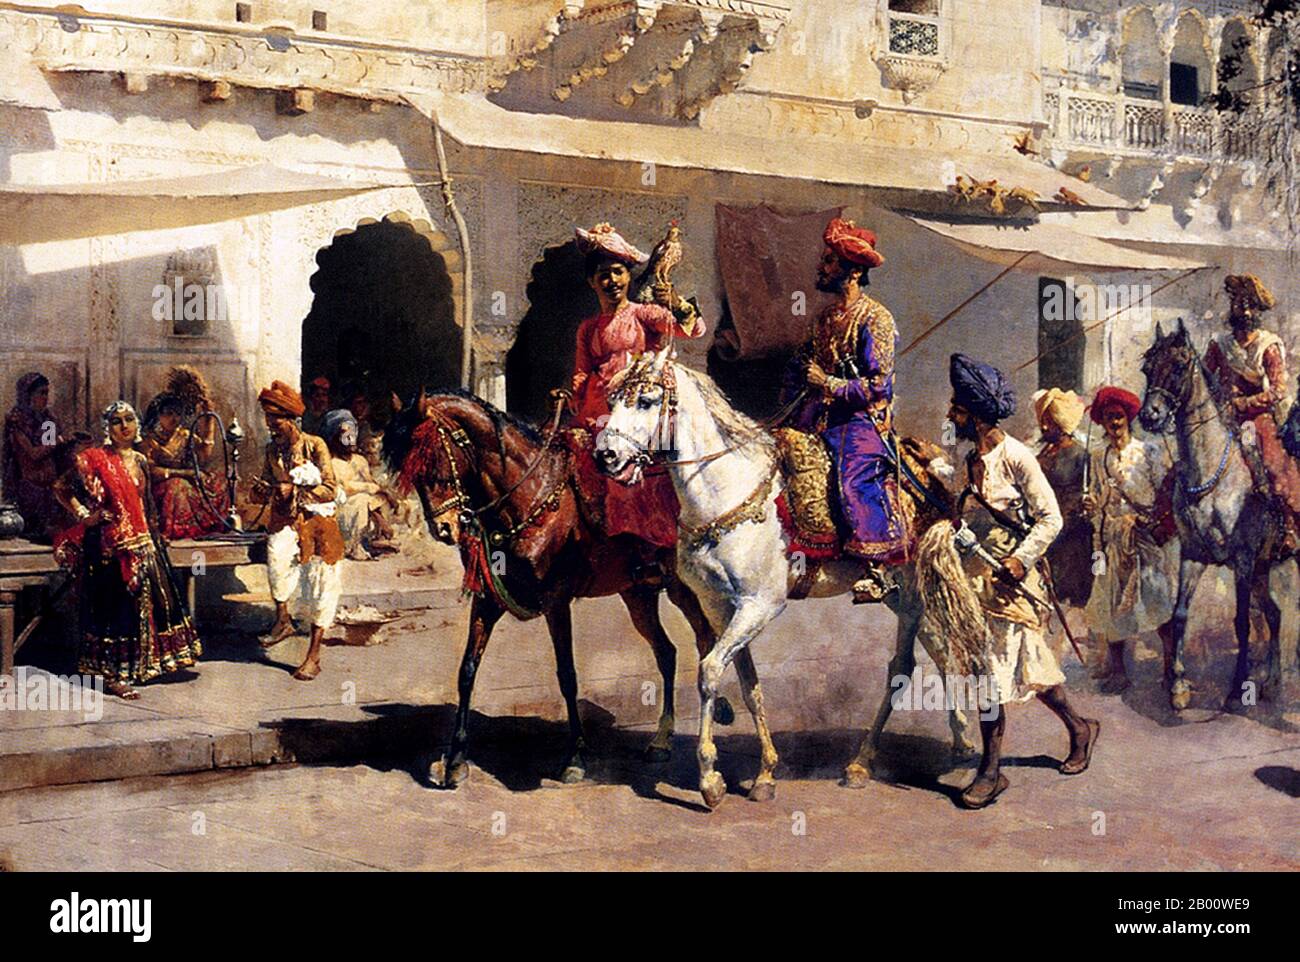 India: 'Leaving for the Hunt at Gwalior'. Oil on canvas painting by Edwin Lord Weeks (1849-1903), 1887.  Edwin Lord Weeks (1849 – 1903), American artist and Orientalist, was born at Boston, Massachusetts, in 1849. He was a pupil of Léon Bonnat and of Jean-Léon Gérôme, at Paris. He made many voyages to the East, and was distinguished as a painter of oriental scenes.  Weeks' parents were affluent spice and tea merchants from Newton, a suburb of Boston and as such they were able to accept, probably encourage, and certainly finance their son's youthful interest in painting and travelling. Stock Photo